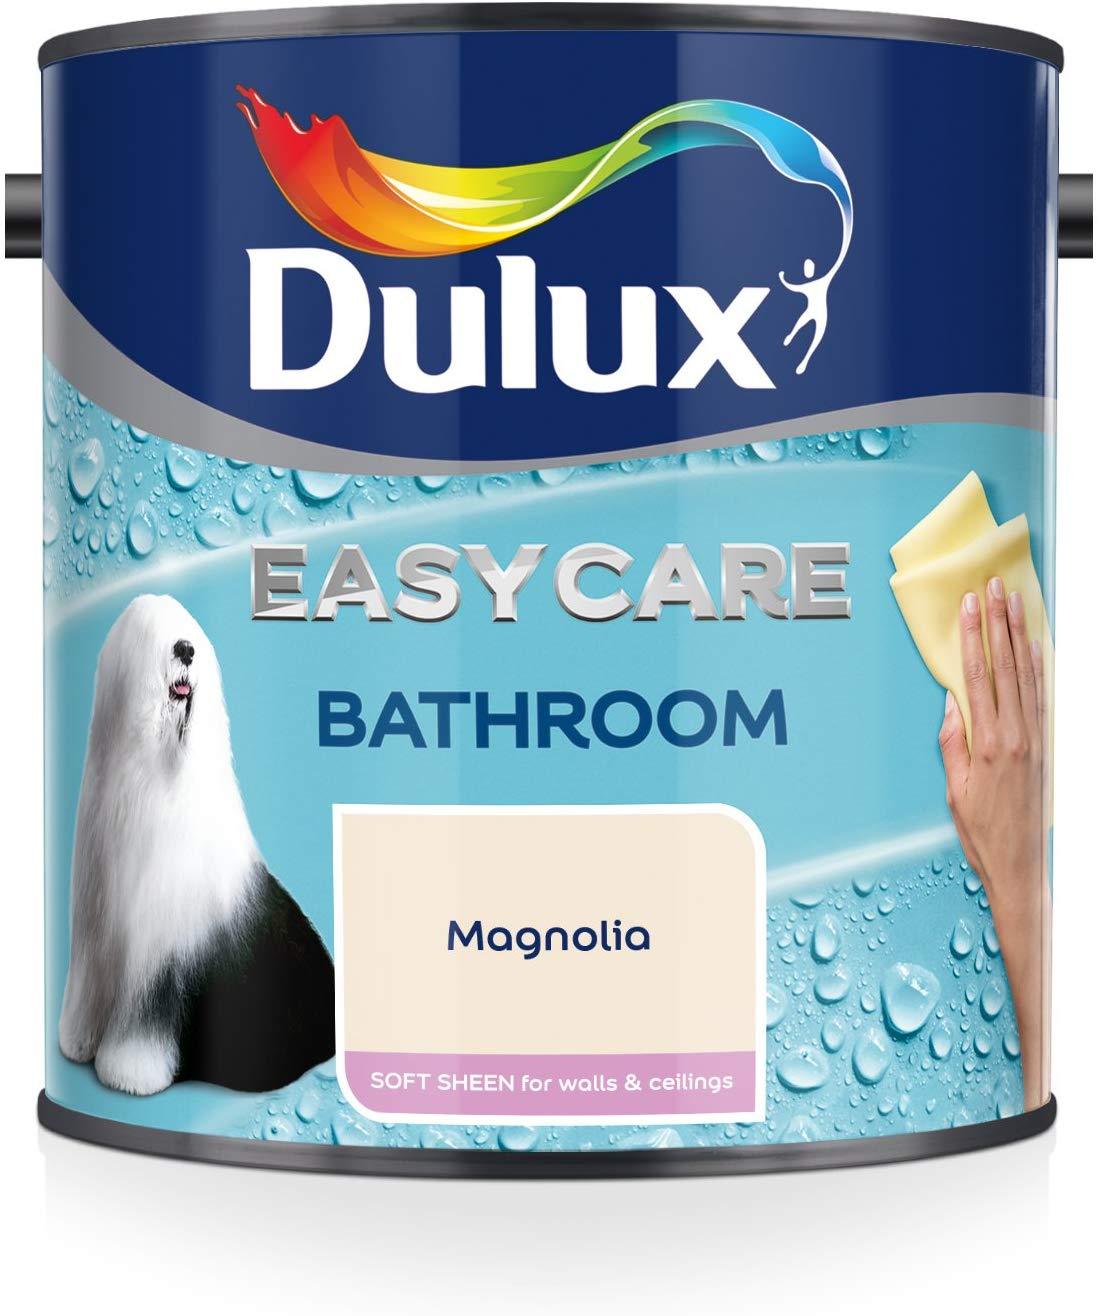 Dulux-Easycare-Bathroom-Soft-Sheen-Emulsion-Paint-For-Walls-And-Ceilings-Magnolia-2.5L